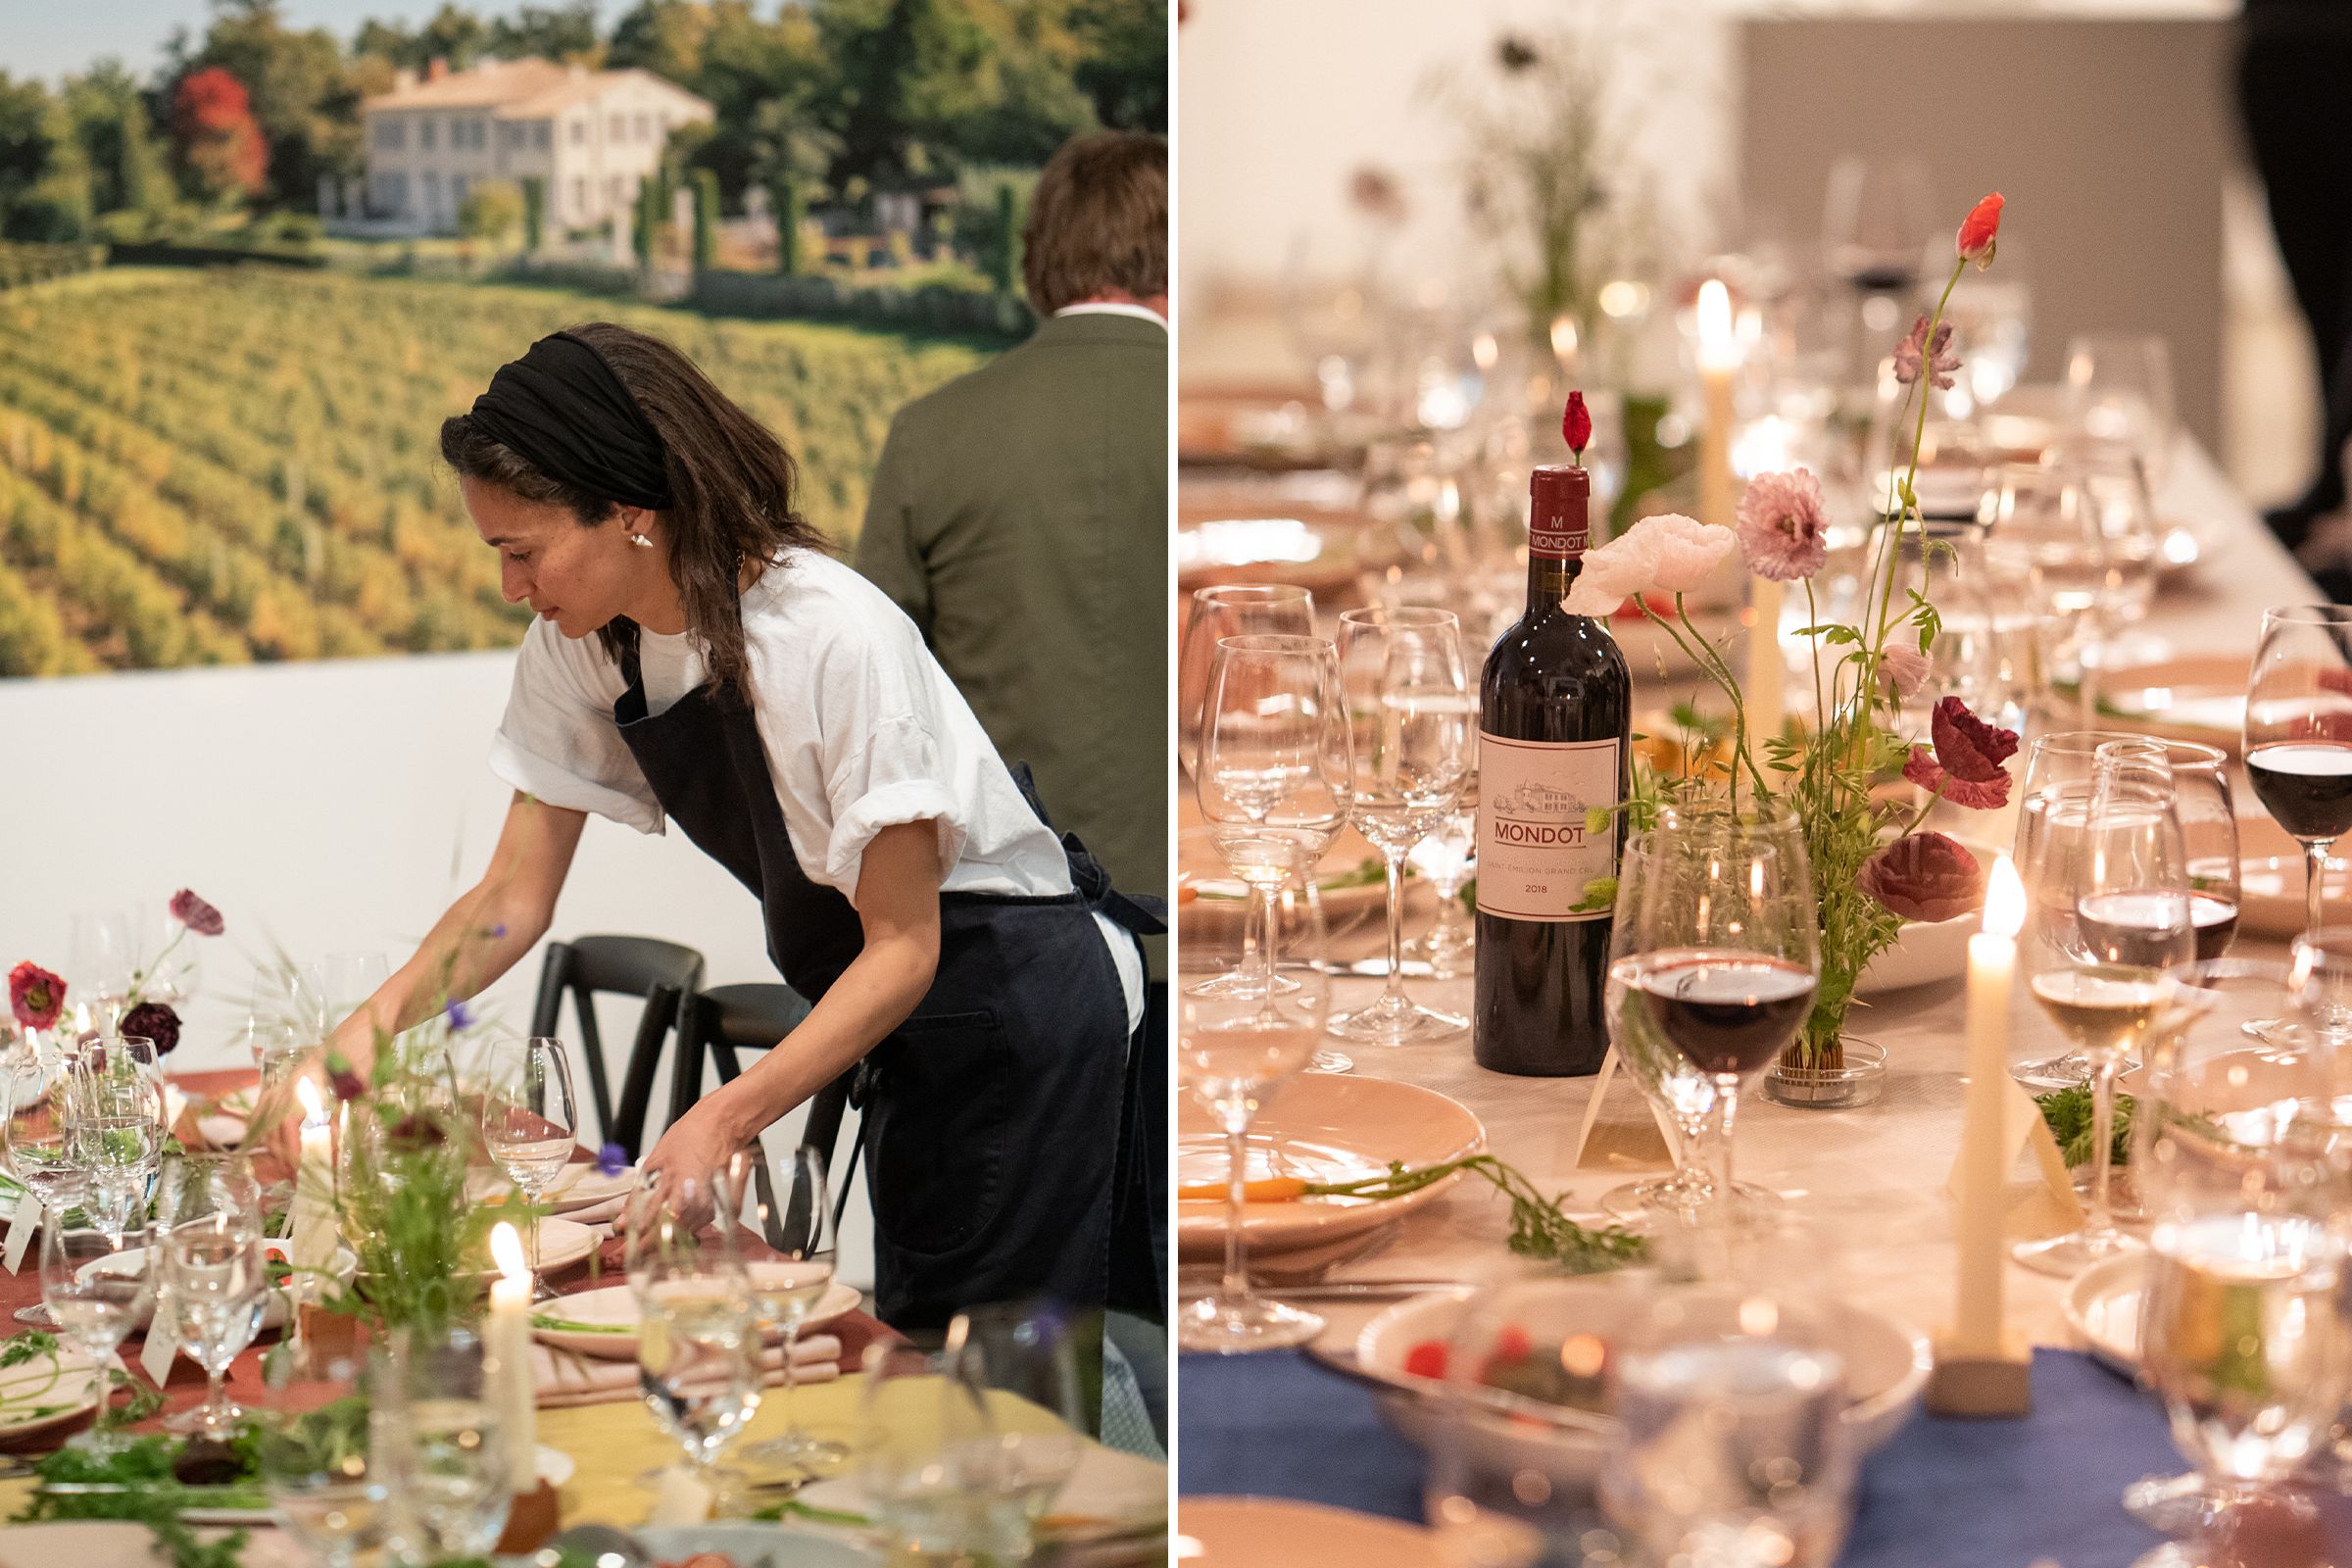 June 2022 | Left: The food artist and chef Laila Gohar prepares a private dinner, hosted by The Slowdown, as a toast to the French winery Château Troplong Mondot. Right: The tablescape.